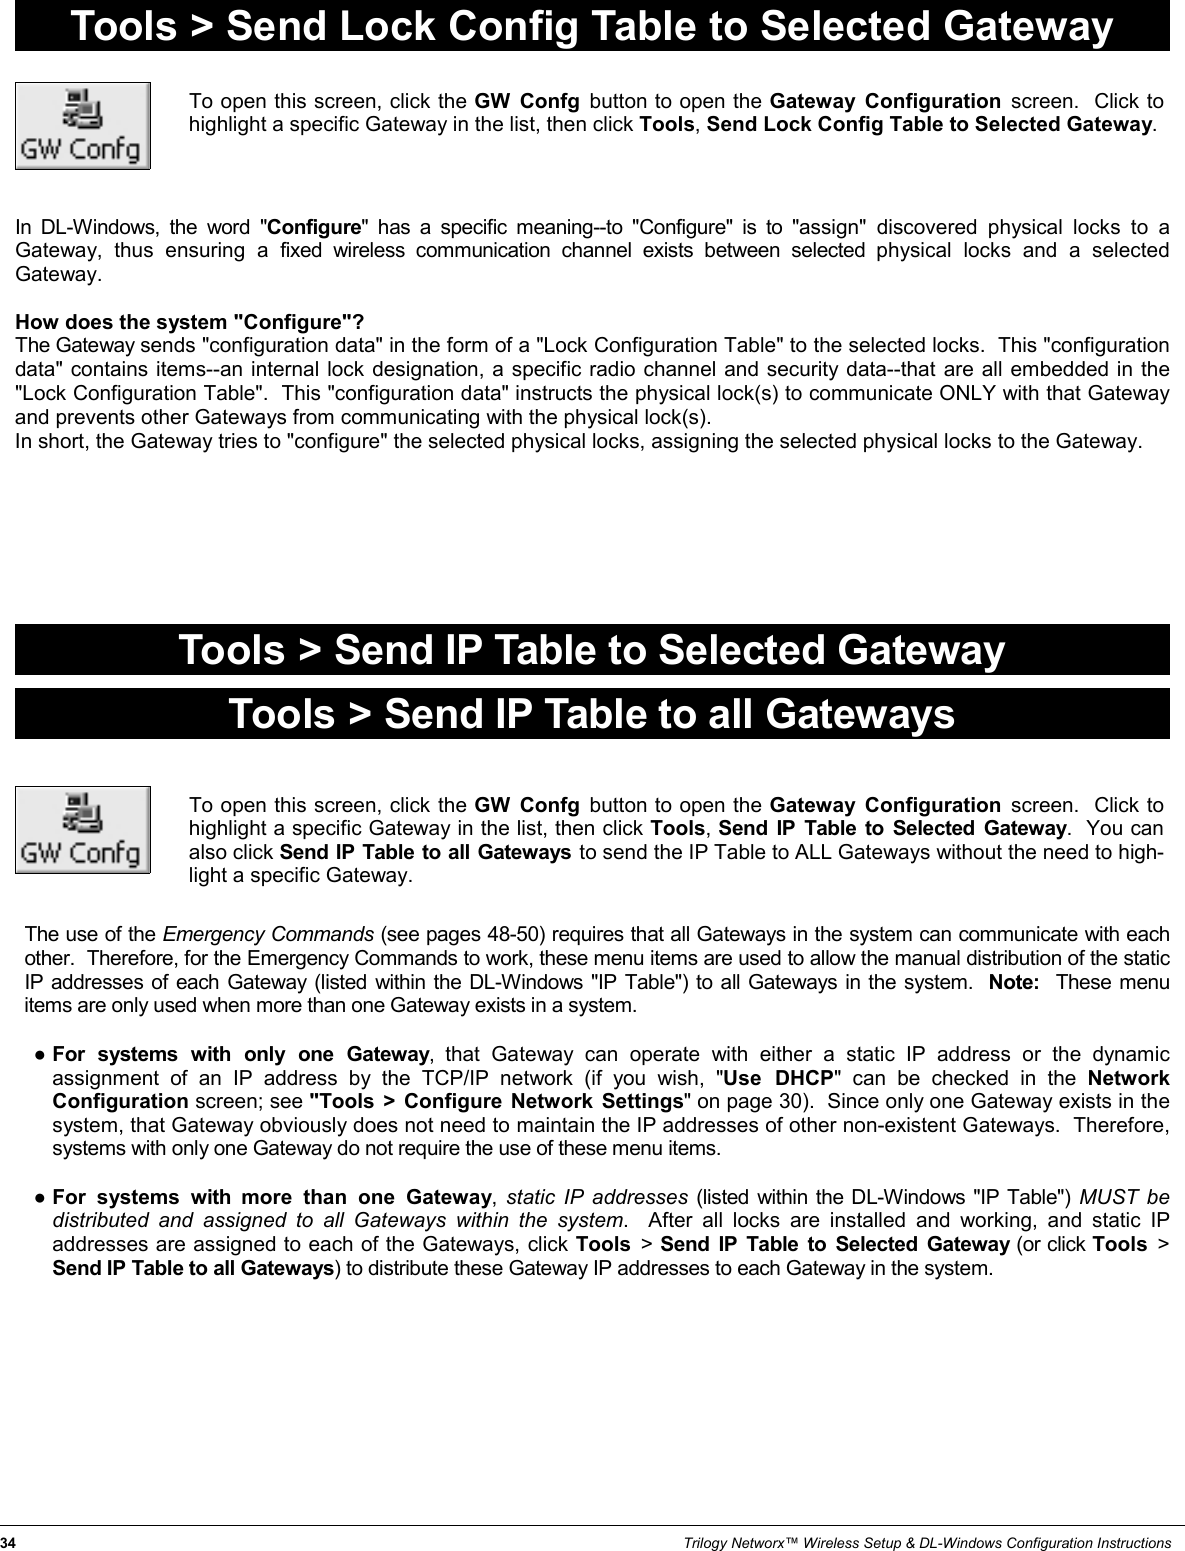 34                                                                                                                                                                 Trilogy Networx™ Wireless Setup &amp; DL-Windows Configuration Instructions Tools &gt; Send Lock Config Table to Selected Gateway To open this screen, click the GW Confg button to open the Gateway Configuration screen.  Click to highlight a specific Gateway in the list, then click Tools, Send Lock Config Table to Selected Gateway. In DL-Windows, the word &quot;Configure&quot; has a specific meaning--to &quot;Configure&quot; is to &quot;assign&quot; discovered physical locks to a Gateway, thus ensuring a fixed wireless communication channel exists between selected physical locks and a selected Gateway.    How does the system &quot;Configure&quot;?   The Gateway sends &quot;configuration data&quot; in the form of a &quot;Lock Configuration Table&quot; to the selected locks.  This &quot;configuration data&quot; contains items--an internal lock designation, a specific radio channel and security data--that are all embedded in the &quot;Lock Configuration Table&quot;.  This &quot;configuration data&quot; instructs the physical lock(s) to communicate ONLY with that Gateway and prevents other Gateways from communicating with the physical lock(s).   In short, the Gateway tries to &quot;configure&quot; the selected physical locks, assigning the selected physical locks to the Gateway. Tools &gt; Send IP Table to Selected Gateway To open this screen, click the GW Confg button to open the Gateway Configuration screen.  Click to highlight a specific Gateway in the list, then click Tools, Send IP Table to Selected Gateway.  You can also click Send IP Table to all Gateways to send the IP Table to ALL Gateways without the need to high-light a specific Gateway. Tools &gt; Send IP Table to all Gateways The use of the Emergency Commands (see pages 48-50) requires that all Gateways in the system can communicate with each other.  Therefore, for the Emergency Commands to work, these menu items are used to allow the manual distribution of the static IP addresses of each Gateway (listed within the DL-Windows &quot;IP Table&quot;) to all Gateways in the system.  Note:  These menu items are only used when more than one Gateway exists in a system.    ●For systems with only one Gateway, that Gateway can operate with either a static IP address or the dynamic assignment of an IP address by the TCP/IP network (if you wish, &quot;Use DHCP&quot; can be checked in the Network Configuration screen; see &quot;Tools &gt; Configure Network Settings&quot; on page 30).  Since only one Gateway exists in the system, that Gateway obviously does not need to maintain the IP addresses of other non-existent Gateways.  Therefore, systems with only one Gateway do not require the use of these menu items.  ●For systems with more than one Gateway,  static IP addresses (listed within the DL-Windows &quot;IP Table&quot;) MUST be distributed and assigned to all Gateways within the system.  After all locks are installed and working, and static IP addresses are assigned to each of the Gateways, click Tools  &gt; Send IP Table to Selected Gateway (or click Tools  &gt; Send IP Table to all Gateways) to distribute these Gateway IP addresses to each Gateway in the system.      